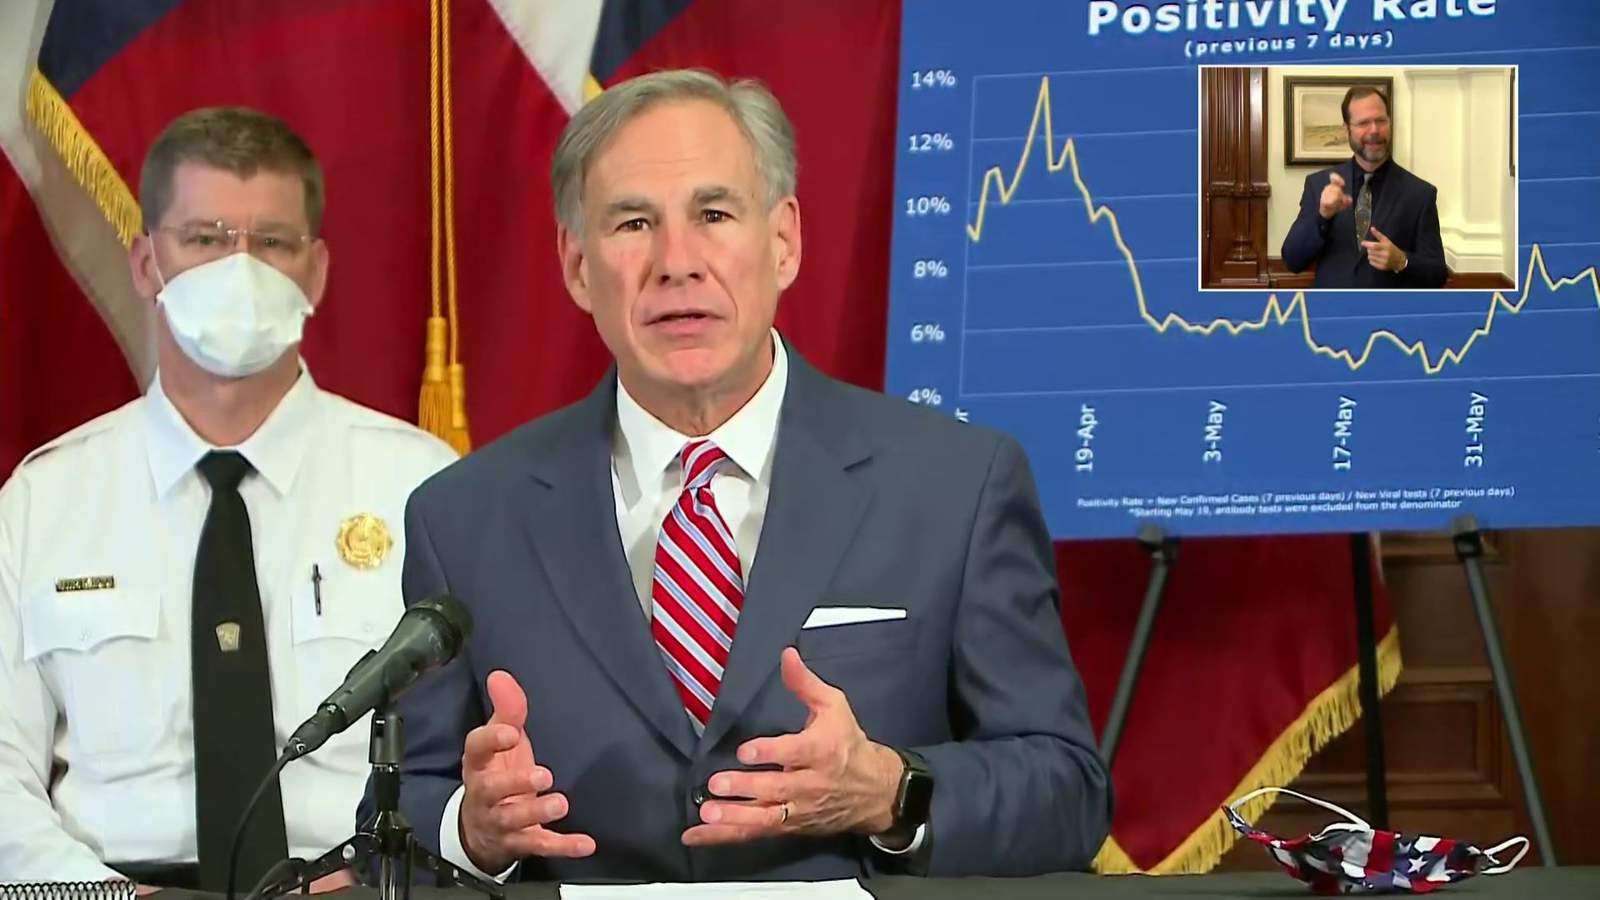 Governor Abbott to provide update on state’s response to COVID-19 - clipped version